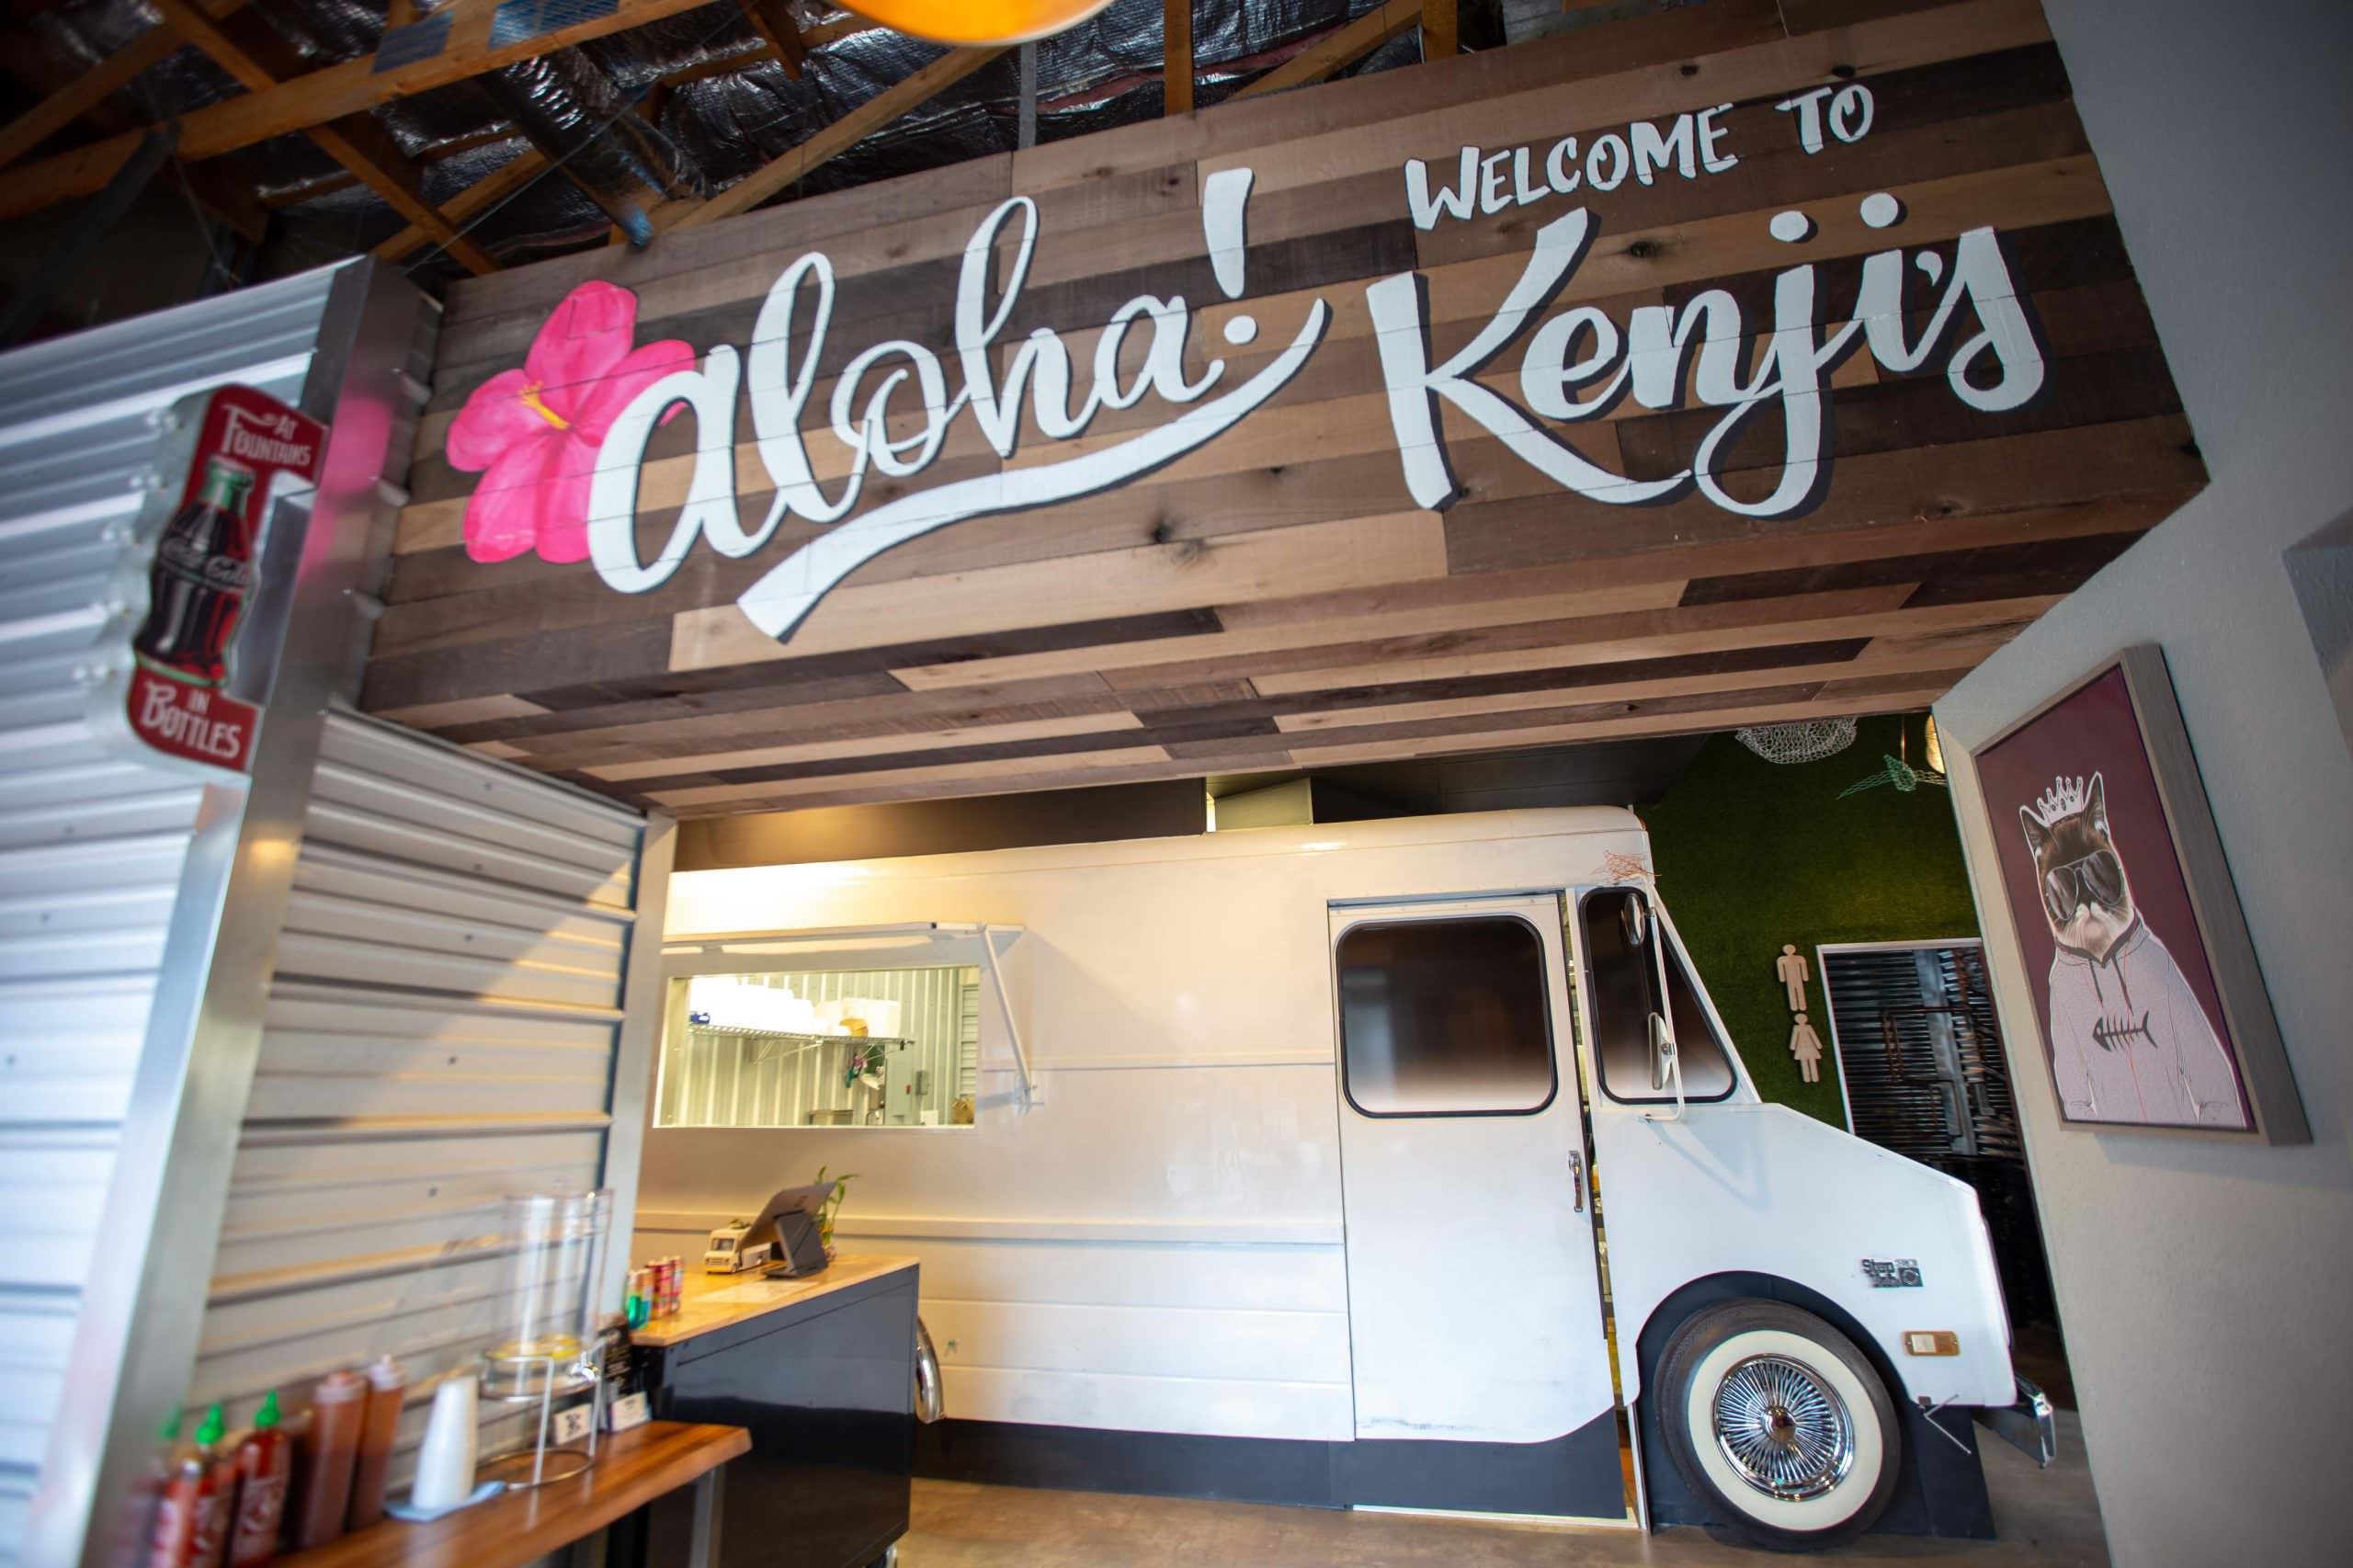 Kenjis storefront location in Reno maintains its food truck vibe